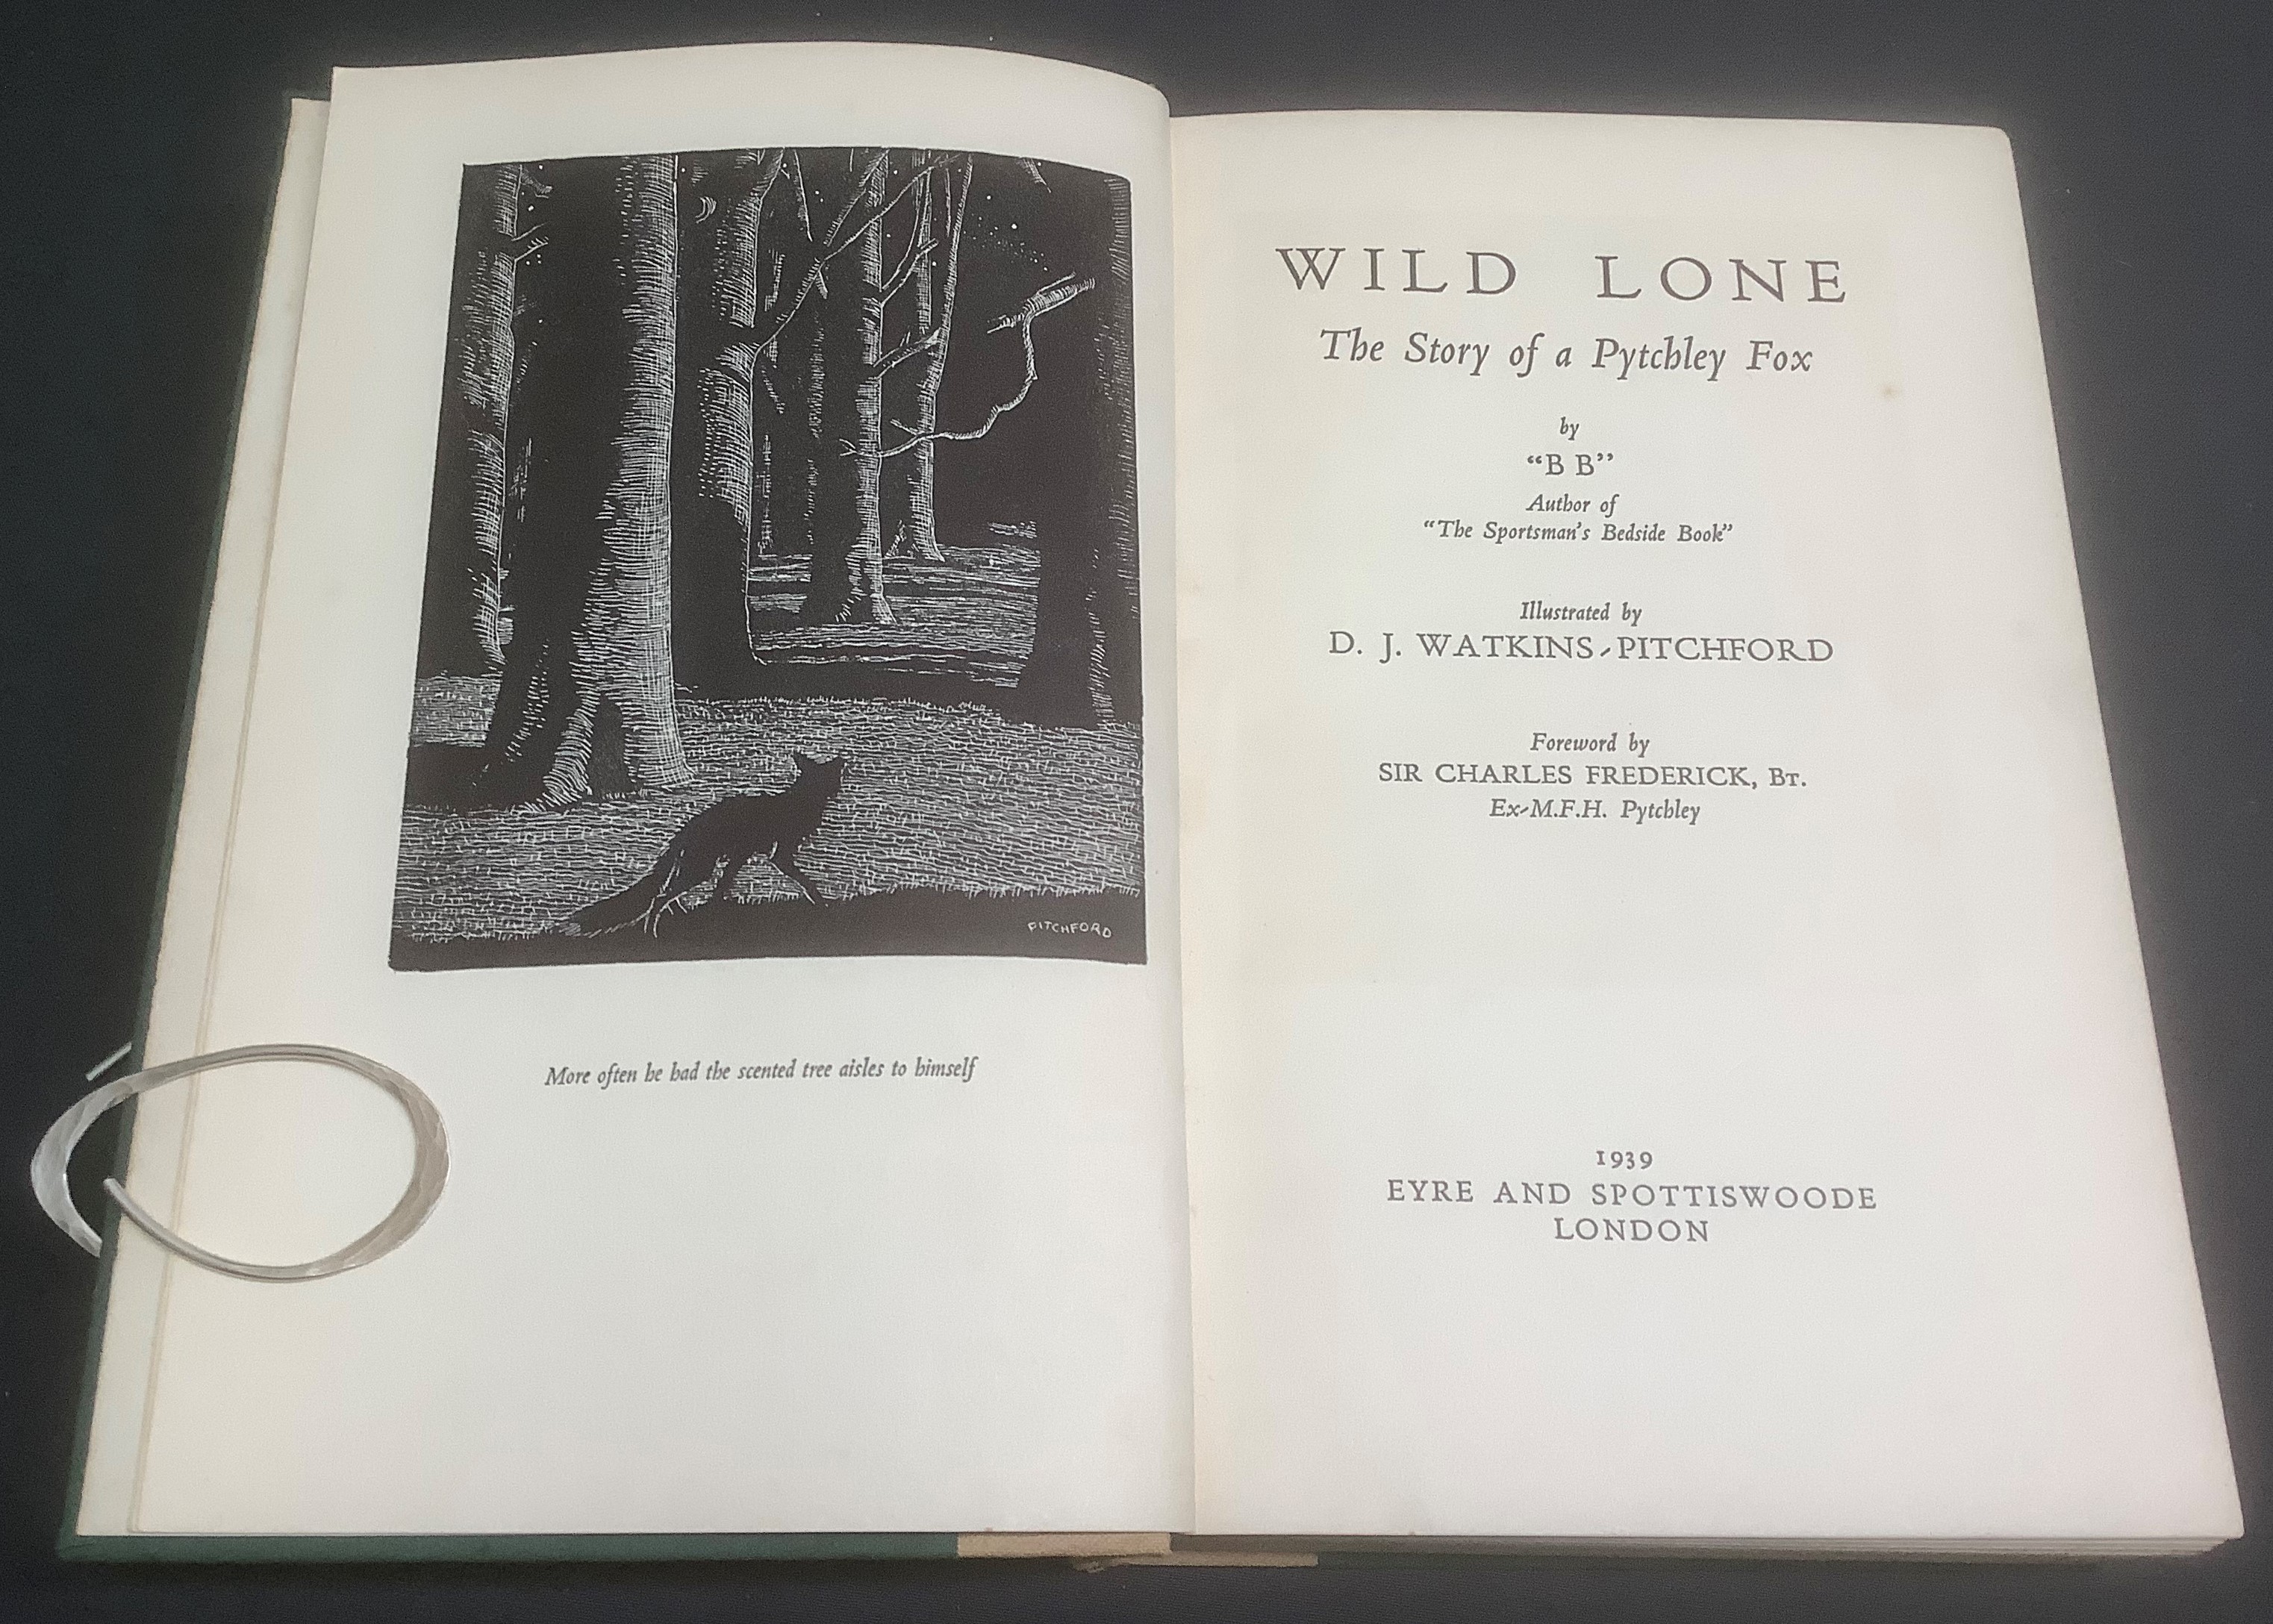 WILD LONE: The Story of a Pytchley Fox Illustrated by D. J. Watkins ...